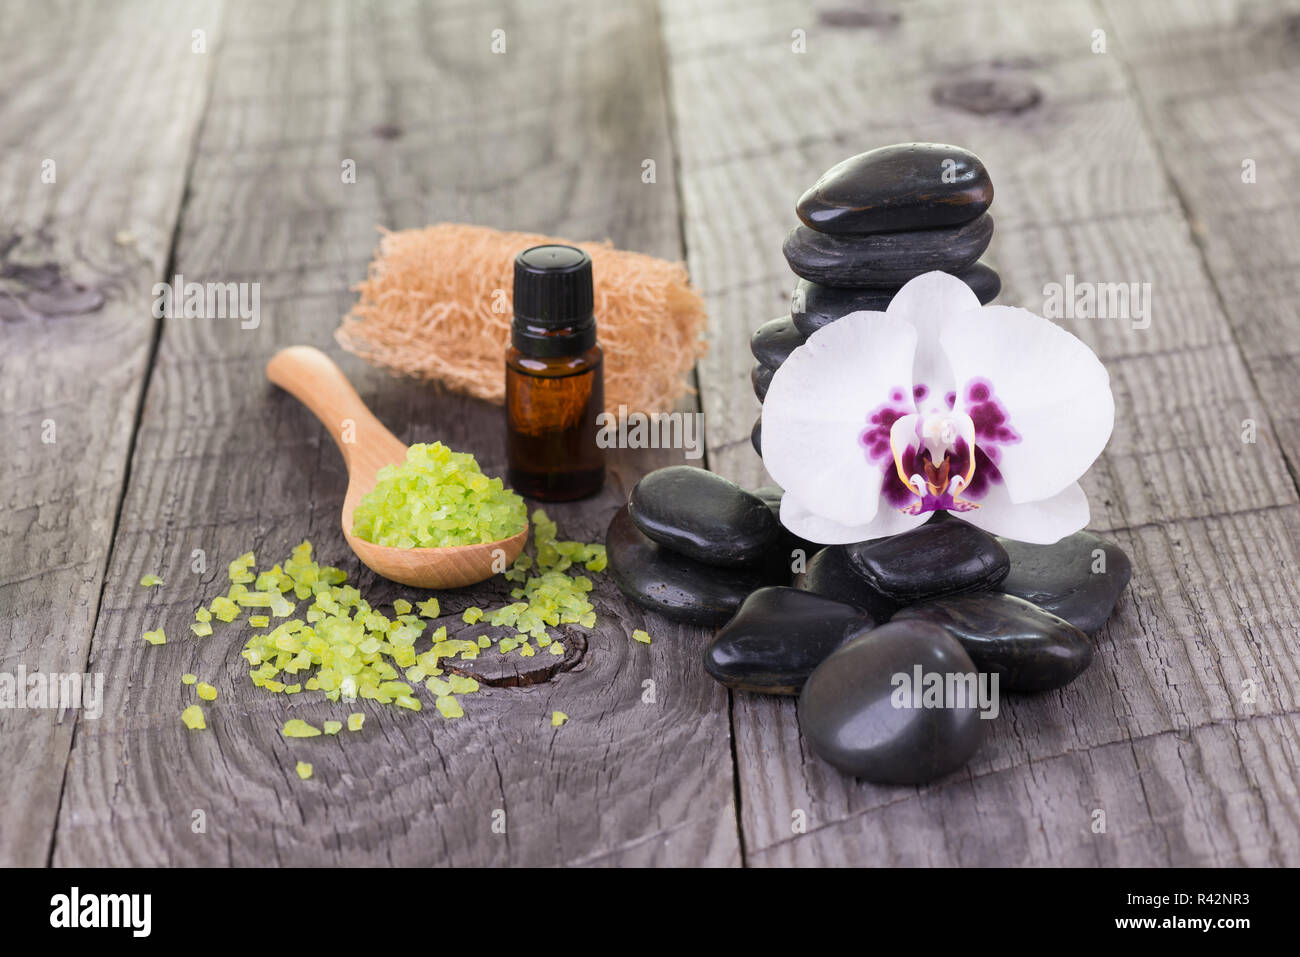 Spa with bath salt, loofah, stones and orchid close-up Stock Photo